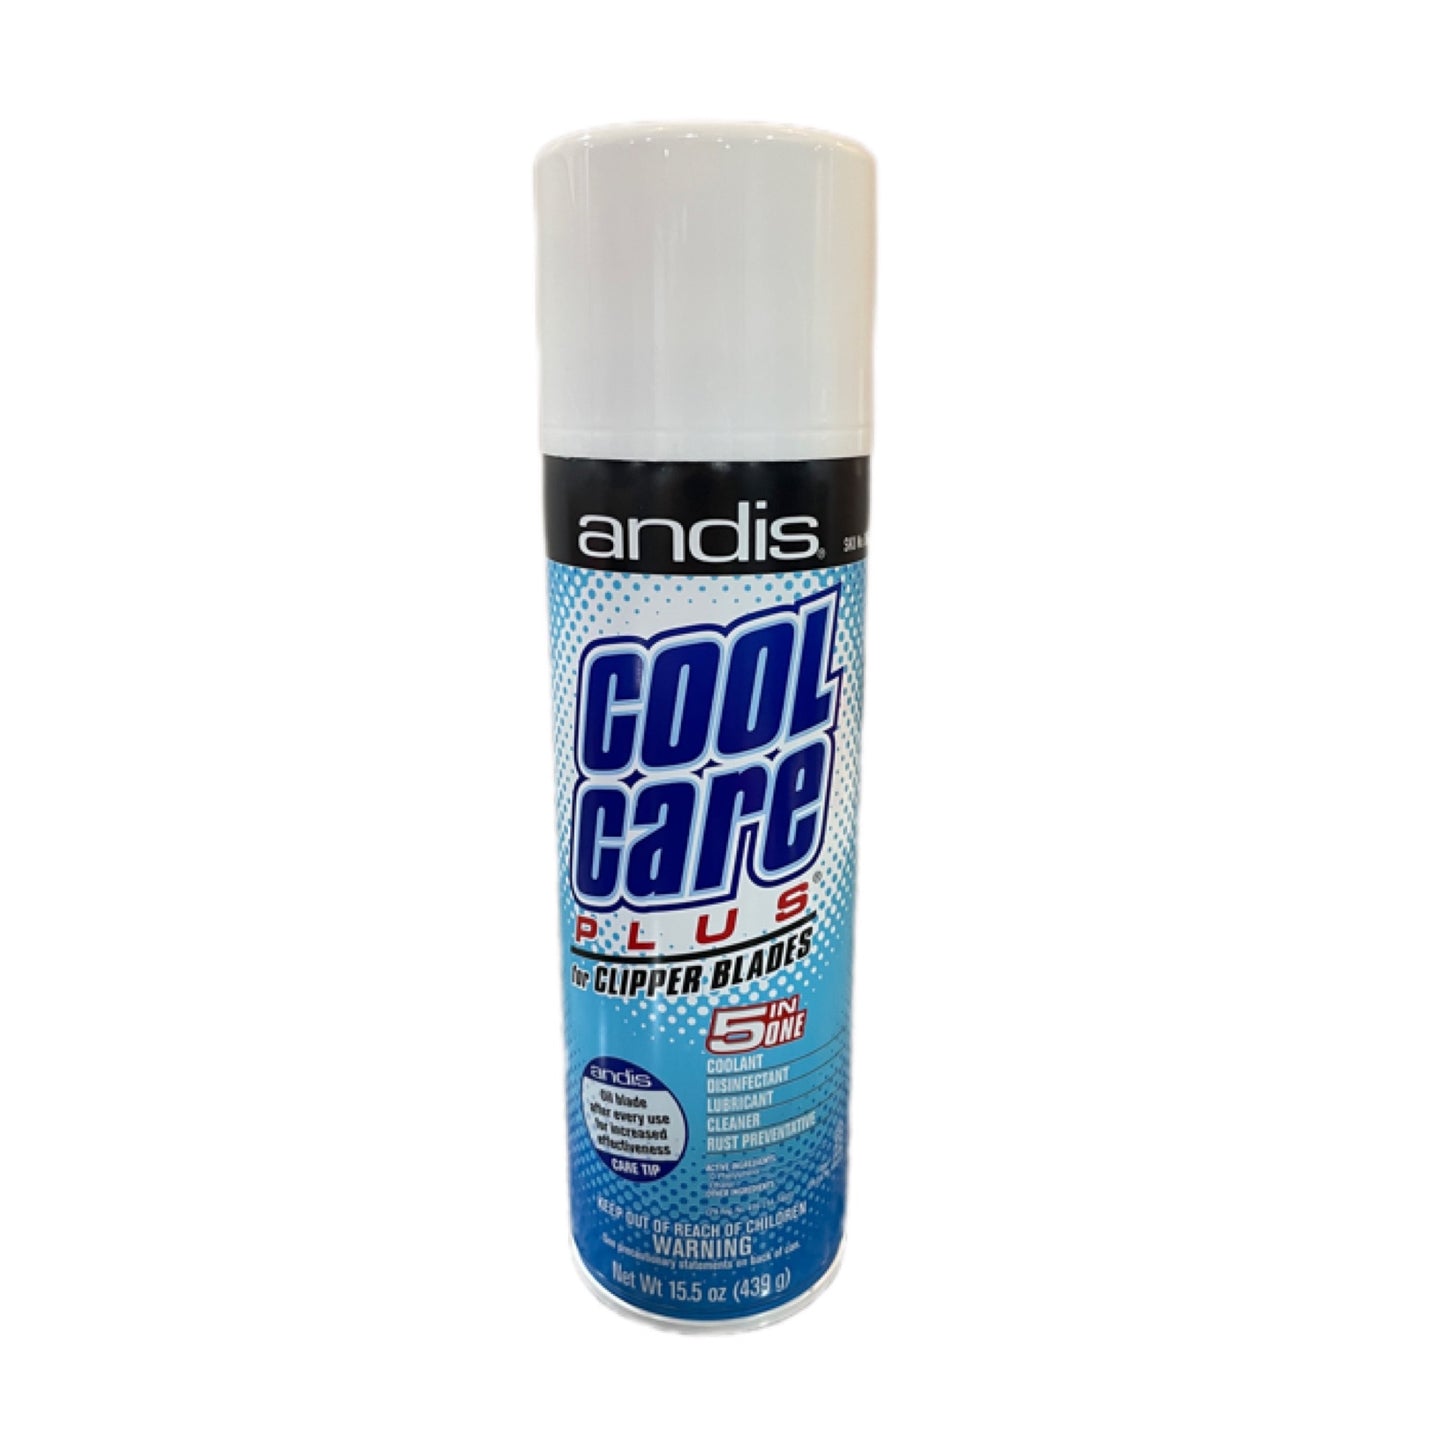 Andis Cool Care Spray for Clipper Blades